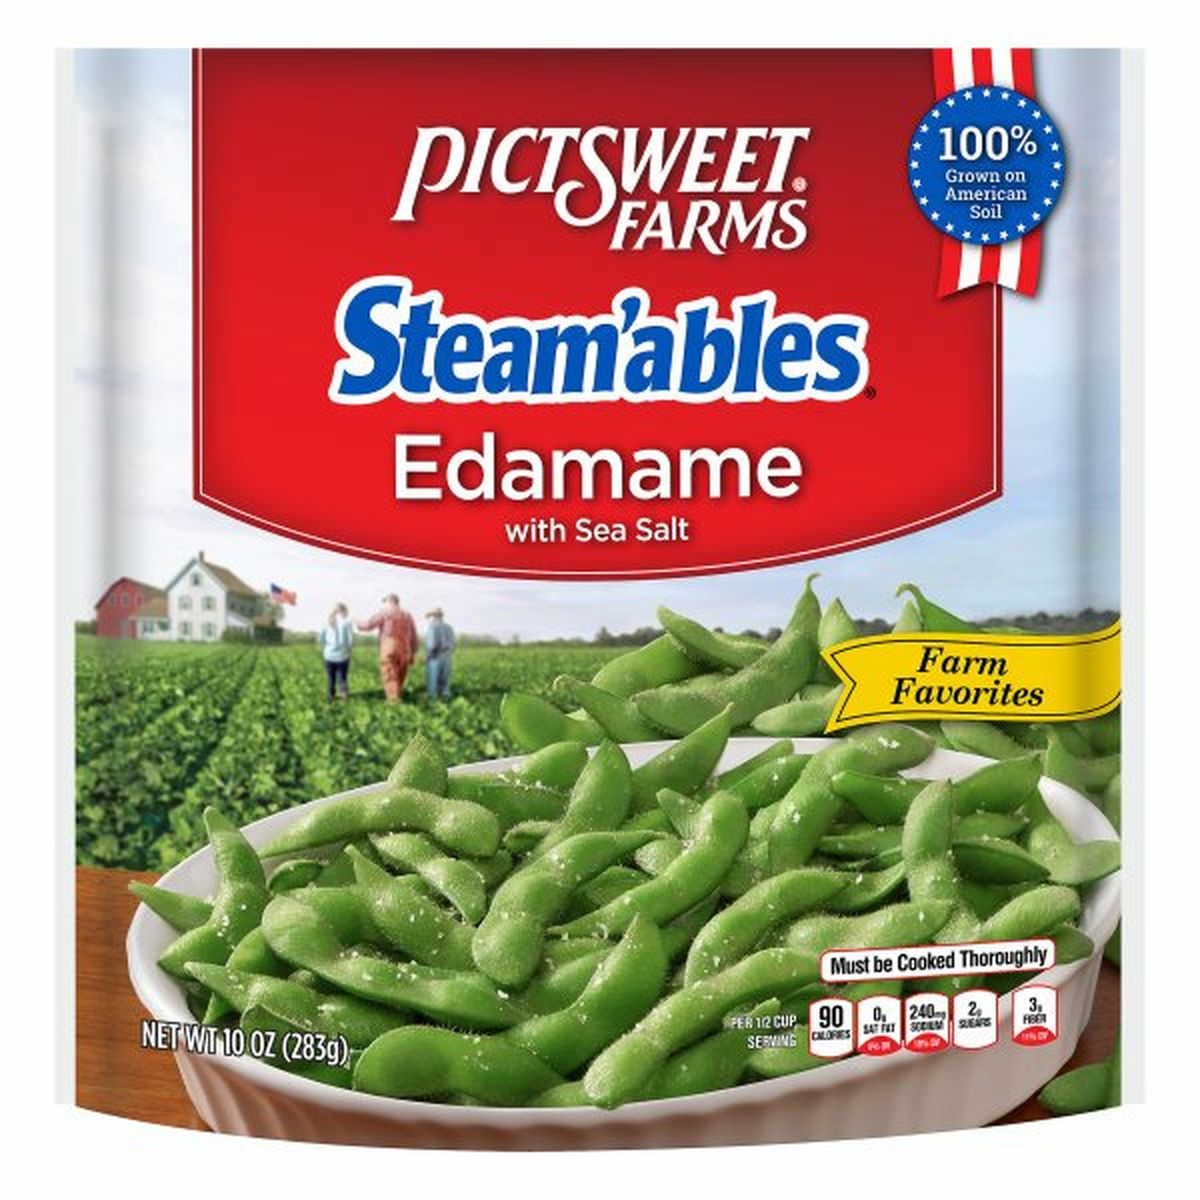 Calories in Pictsweet Farms Steam'ables Edamame with Sea Salt